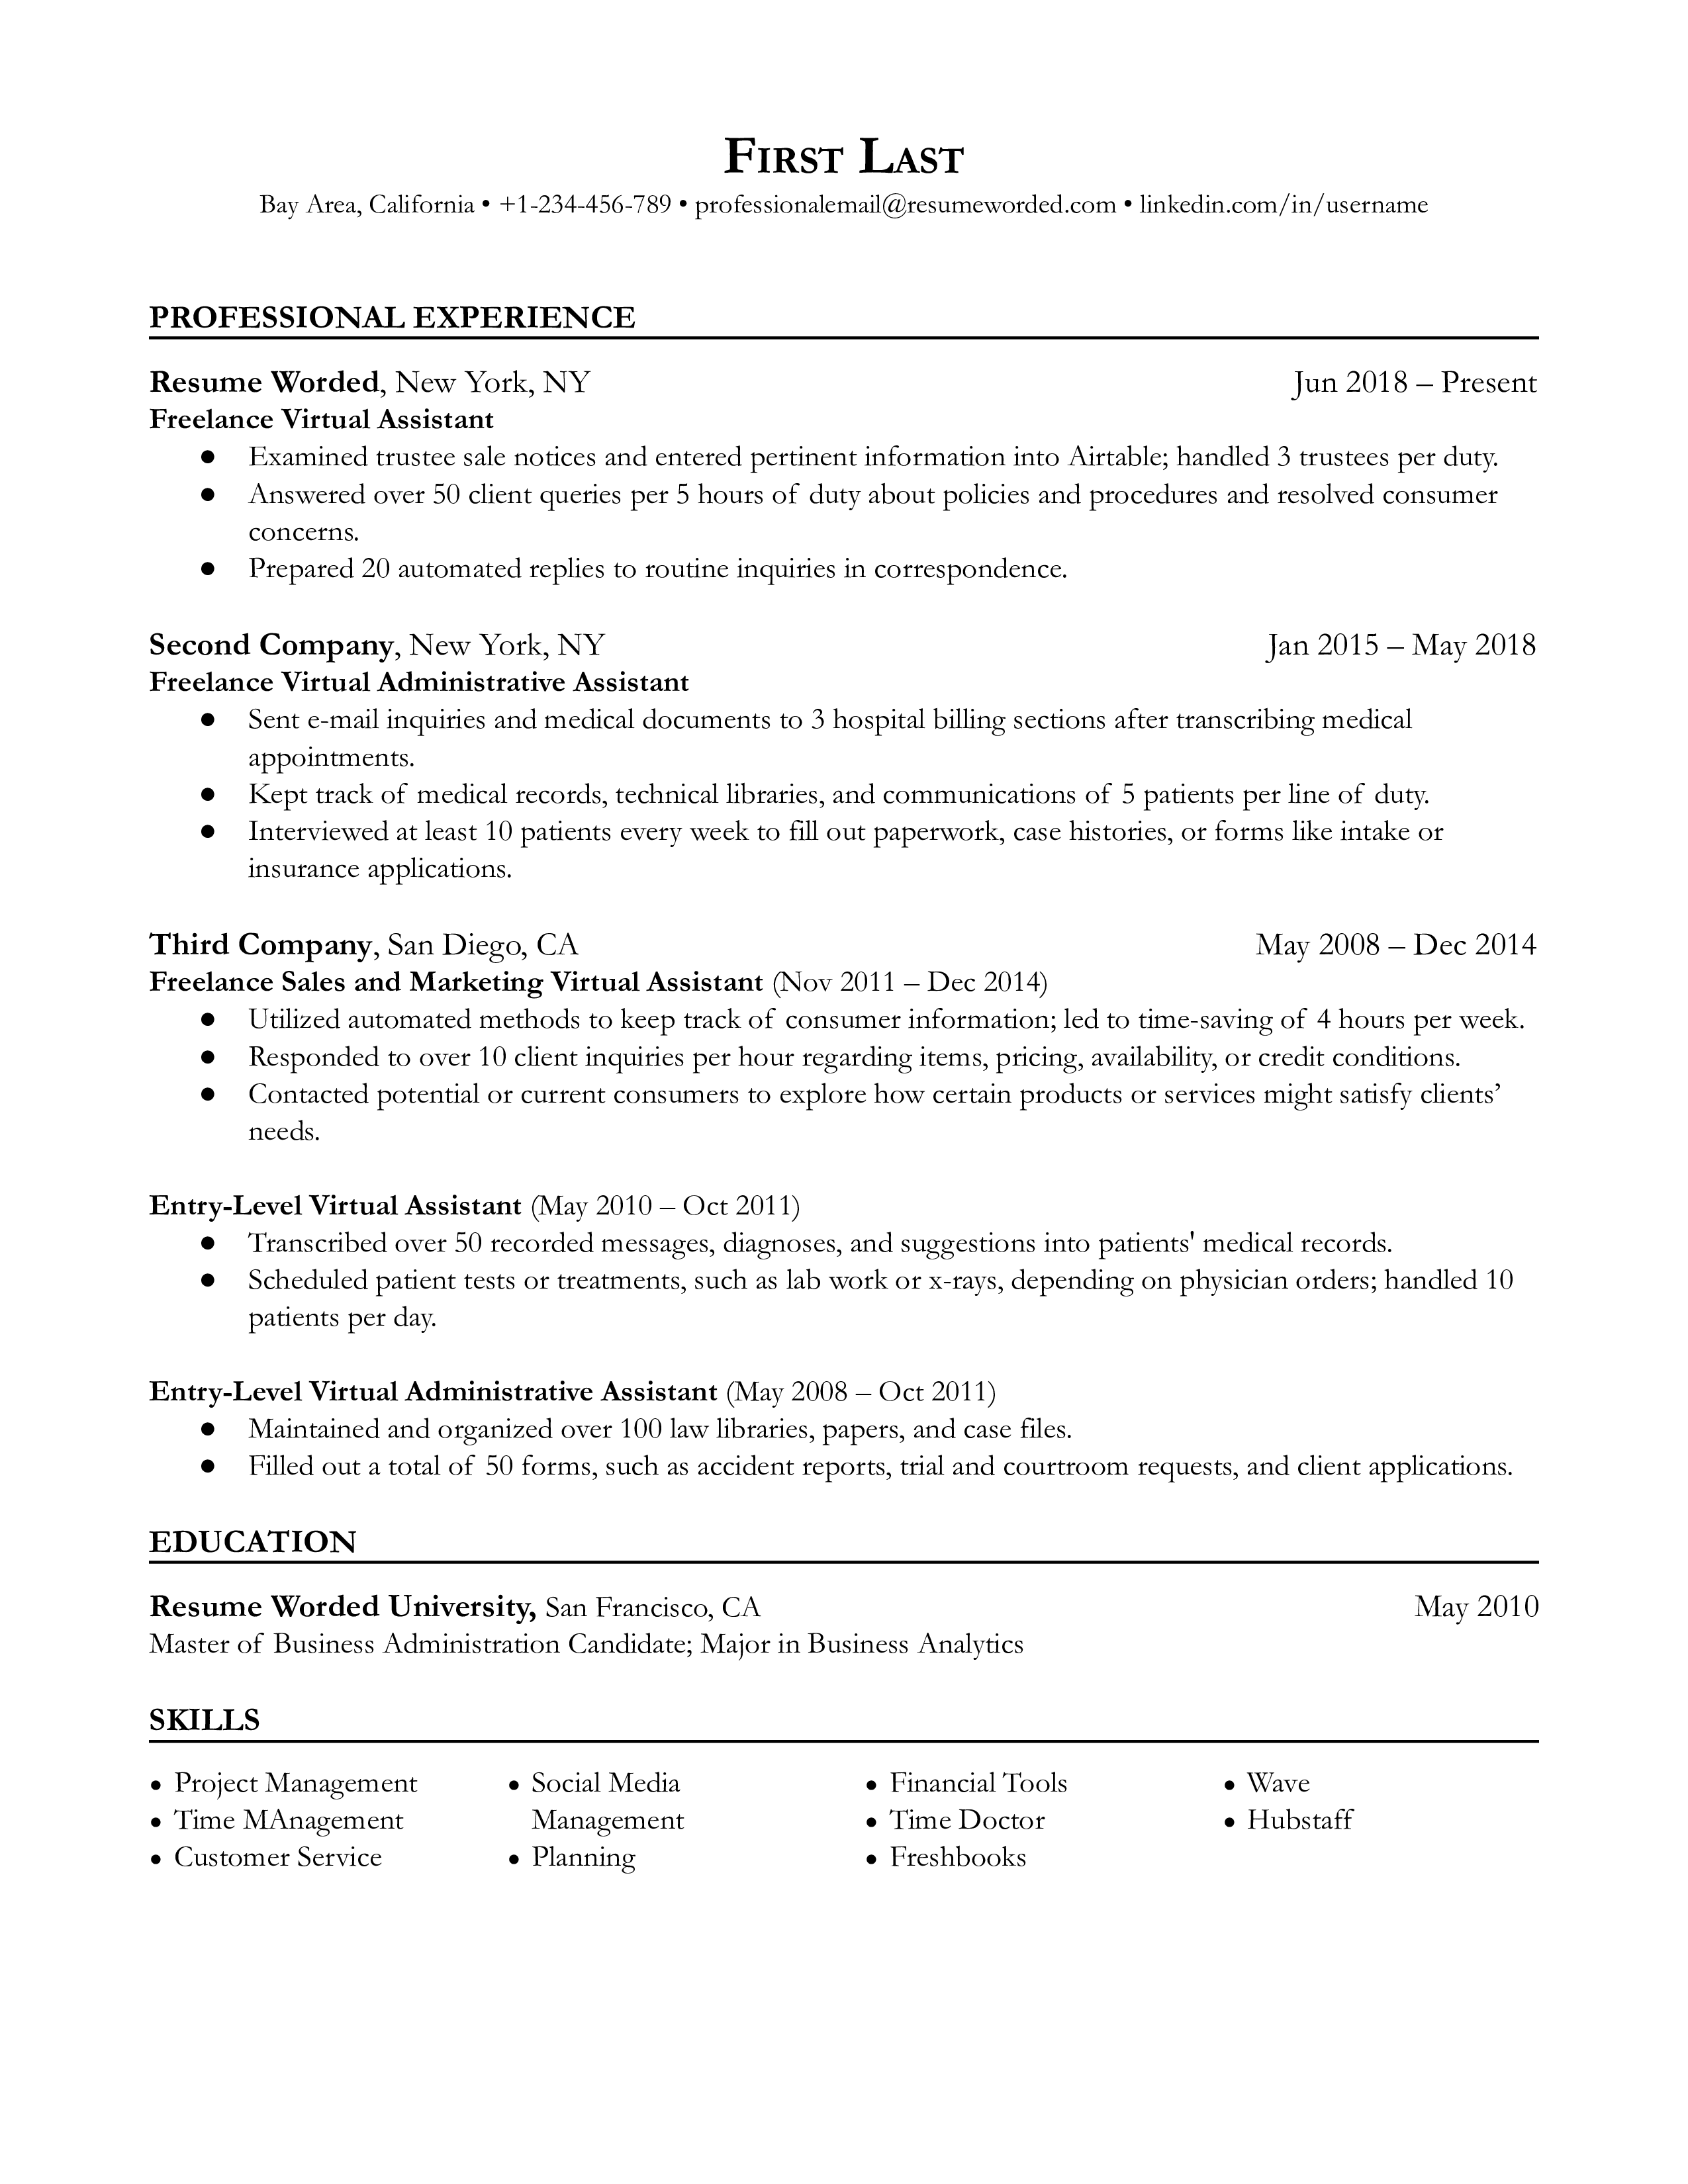 Freelance Virtual Assistant Resume Template + Example